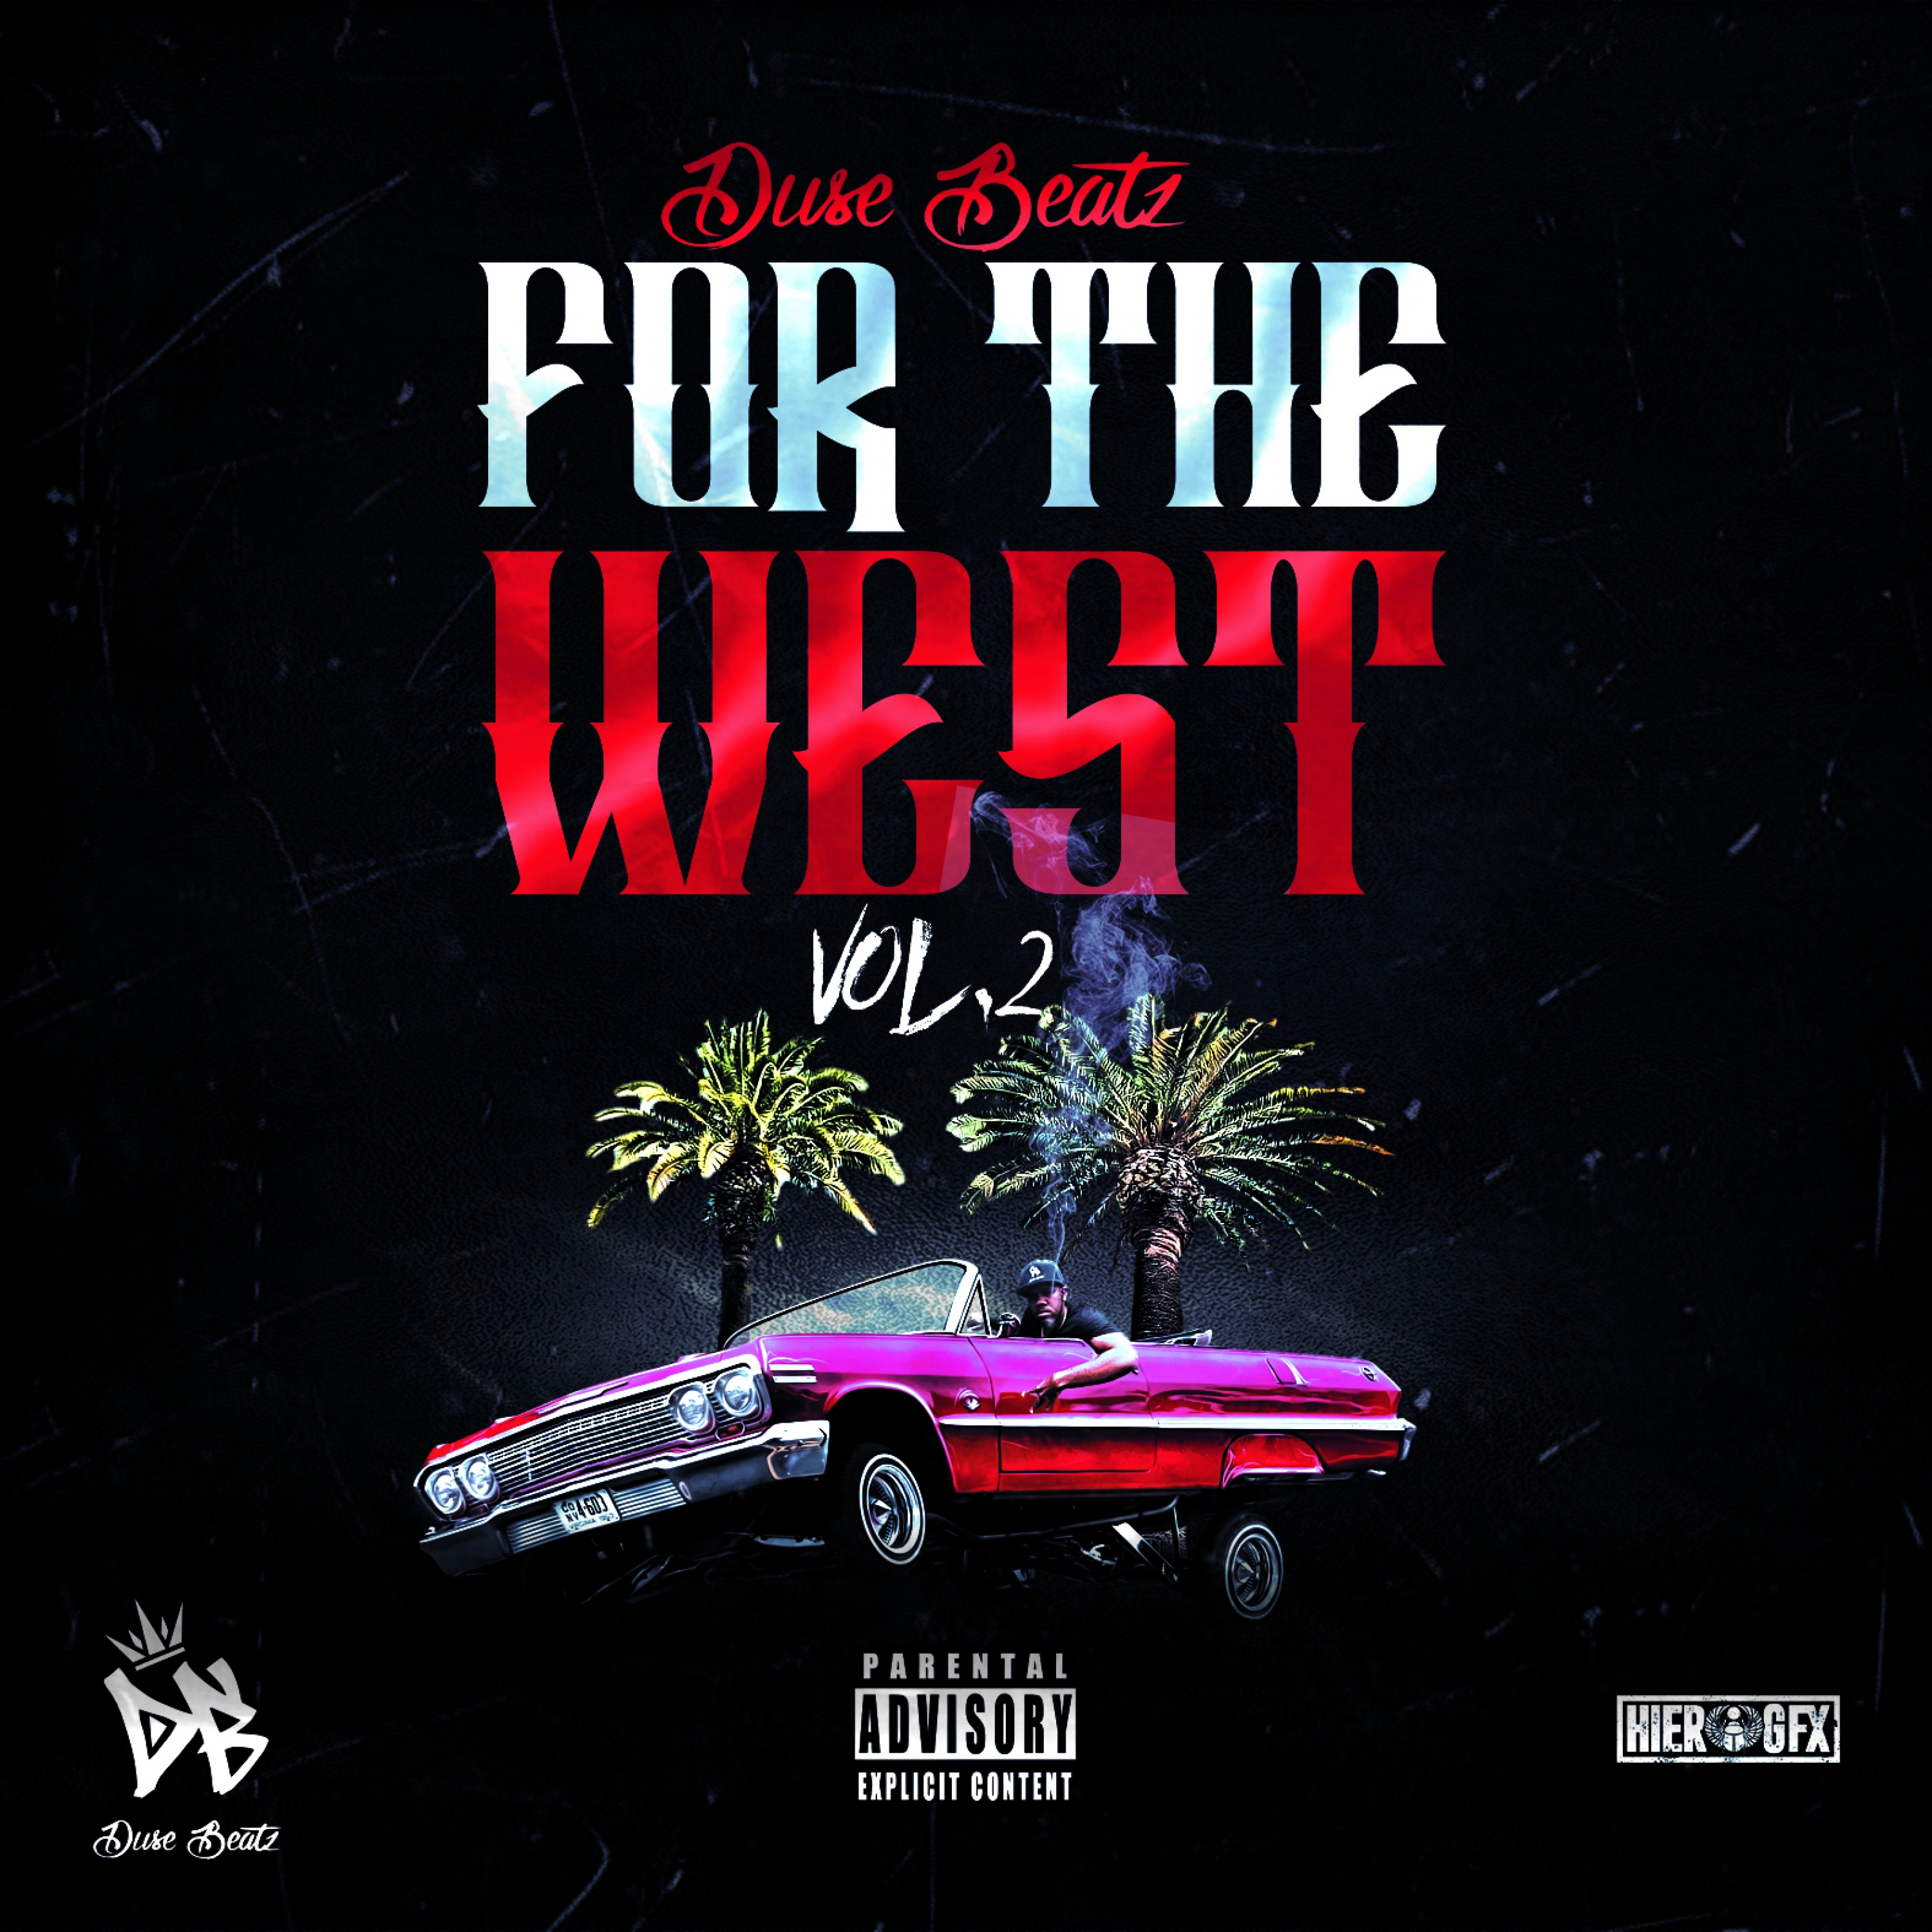 For the West, Vol. 2